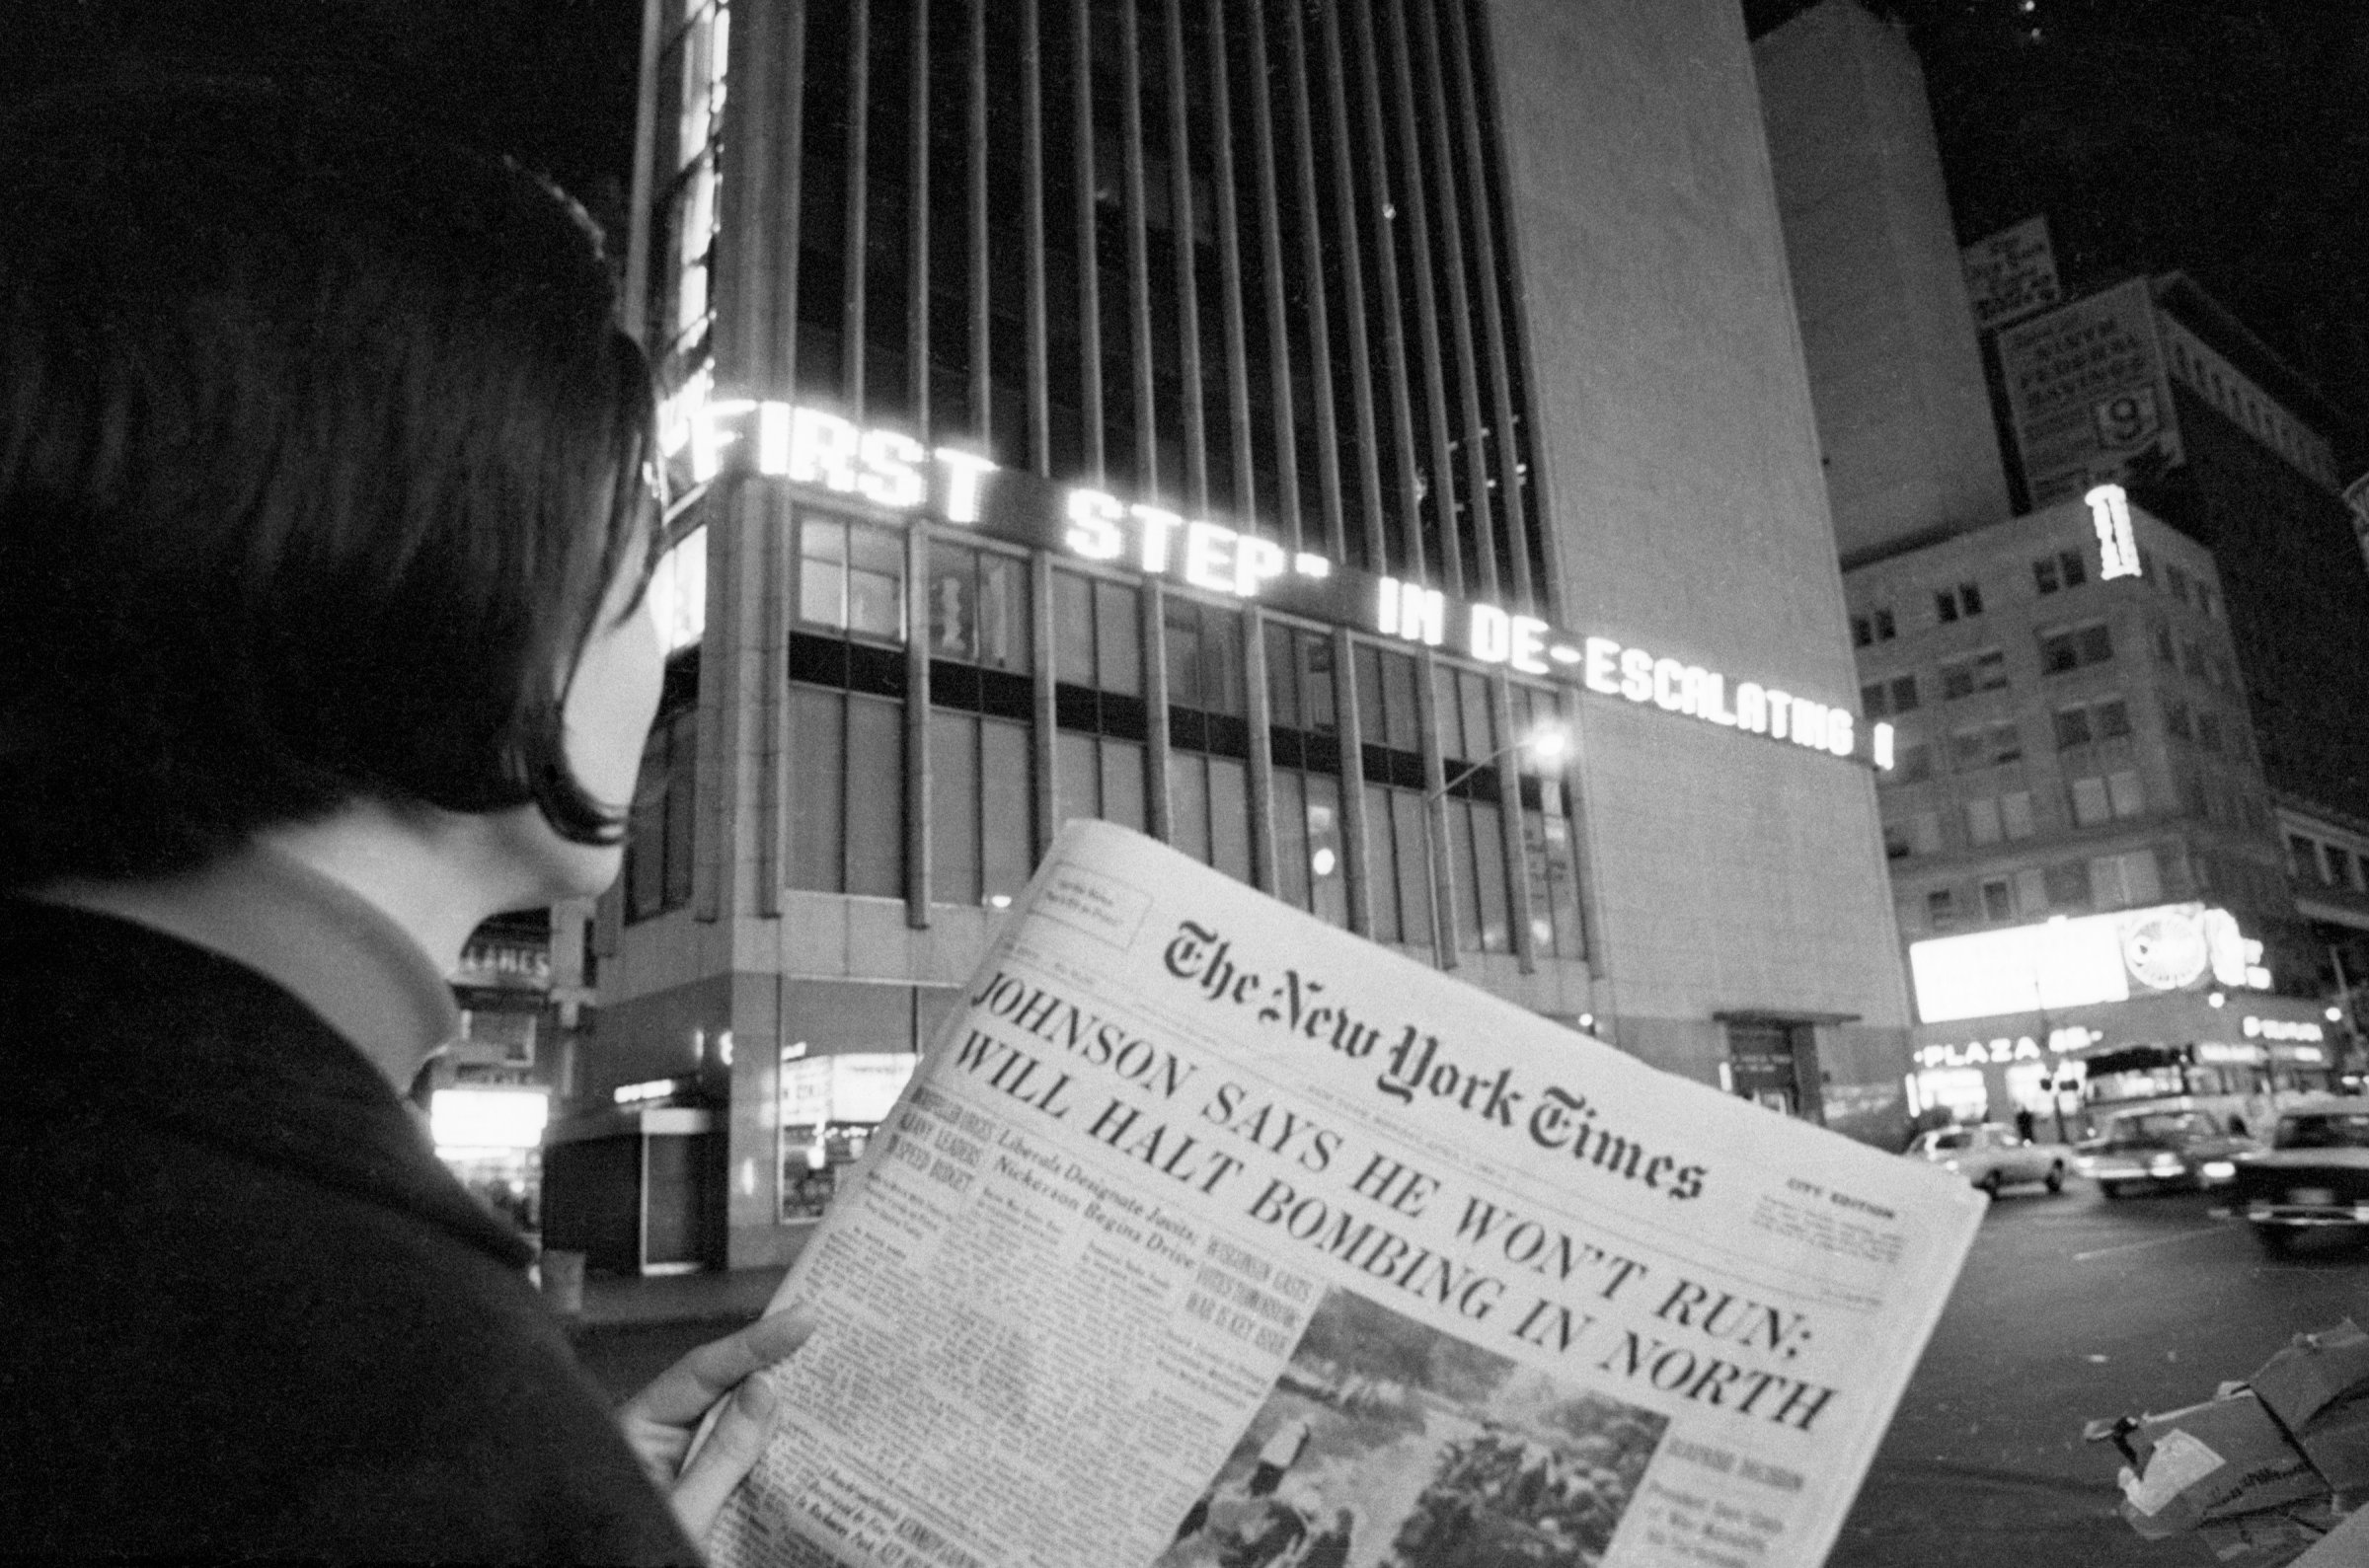 A woman reads the first page of the New York Times of Aril 1, 1968, when the headlines declared : "Johnson Says He Won't Run; Will Halt Bombing in North". This referred to President Johnson's refusal to accept or seek renomination.